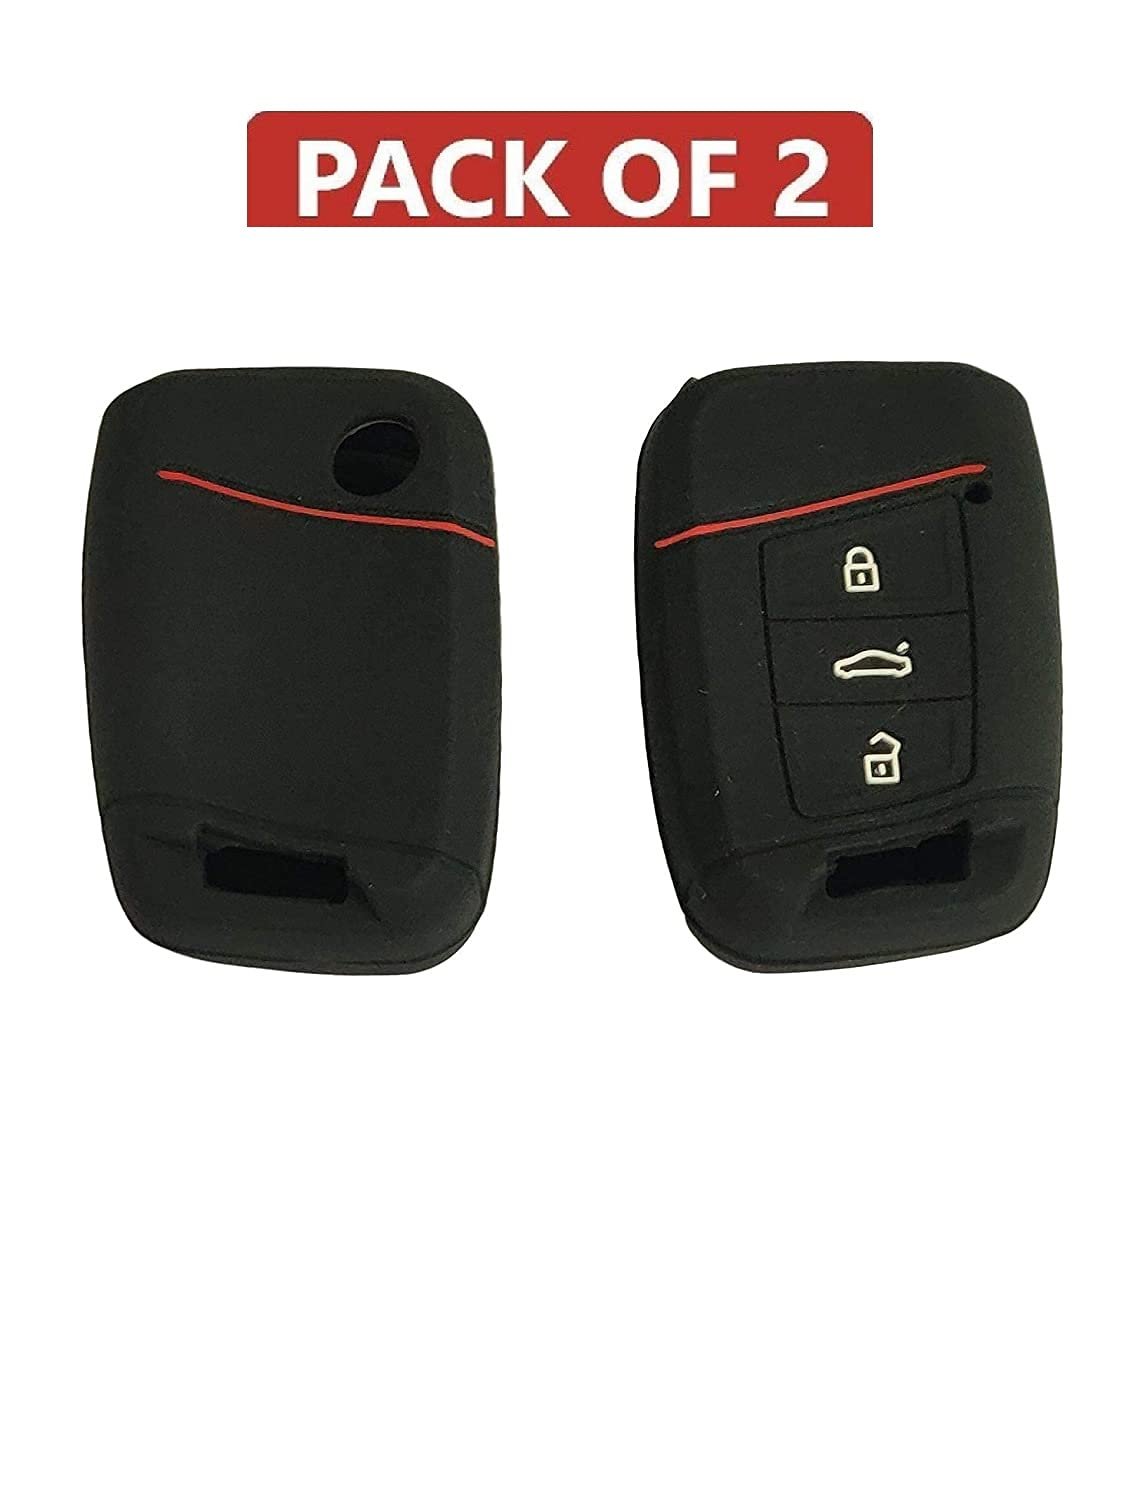 Silicone Key Cover Compatible with New Skoda Octavia 3 Button Smart Key (Pack of 2) Image 